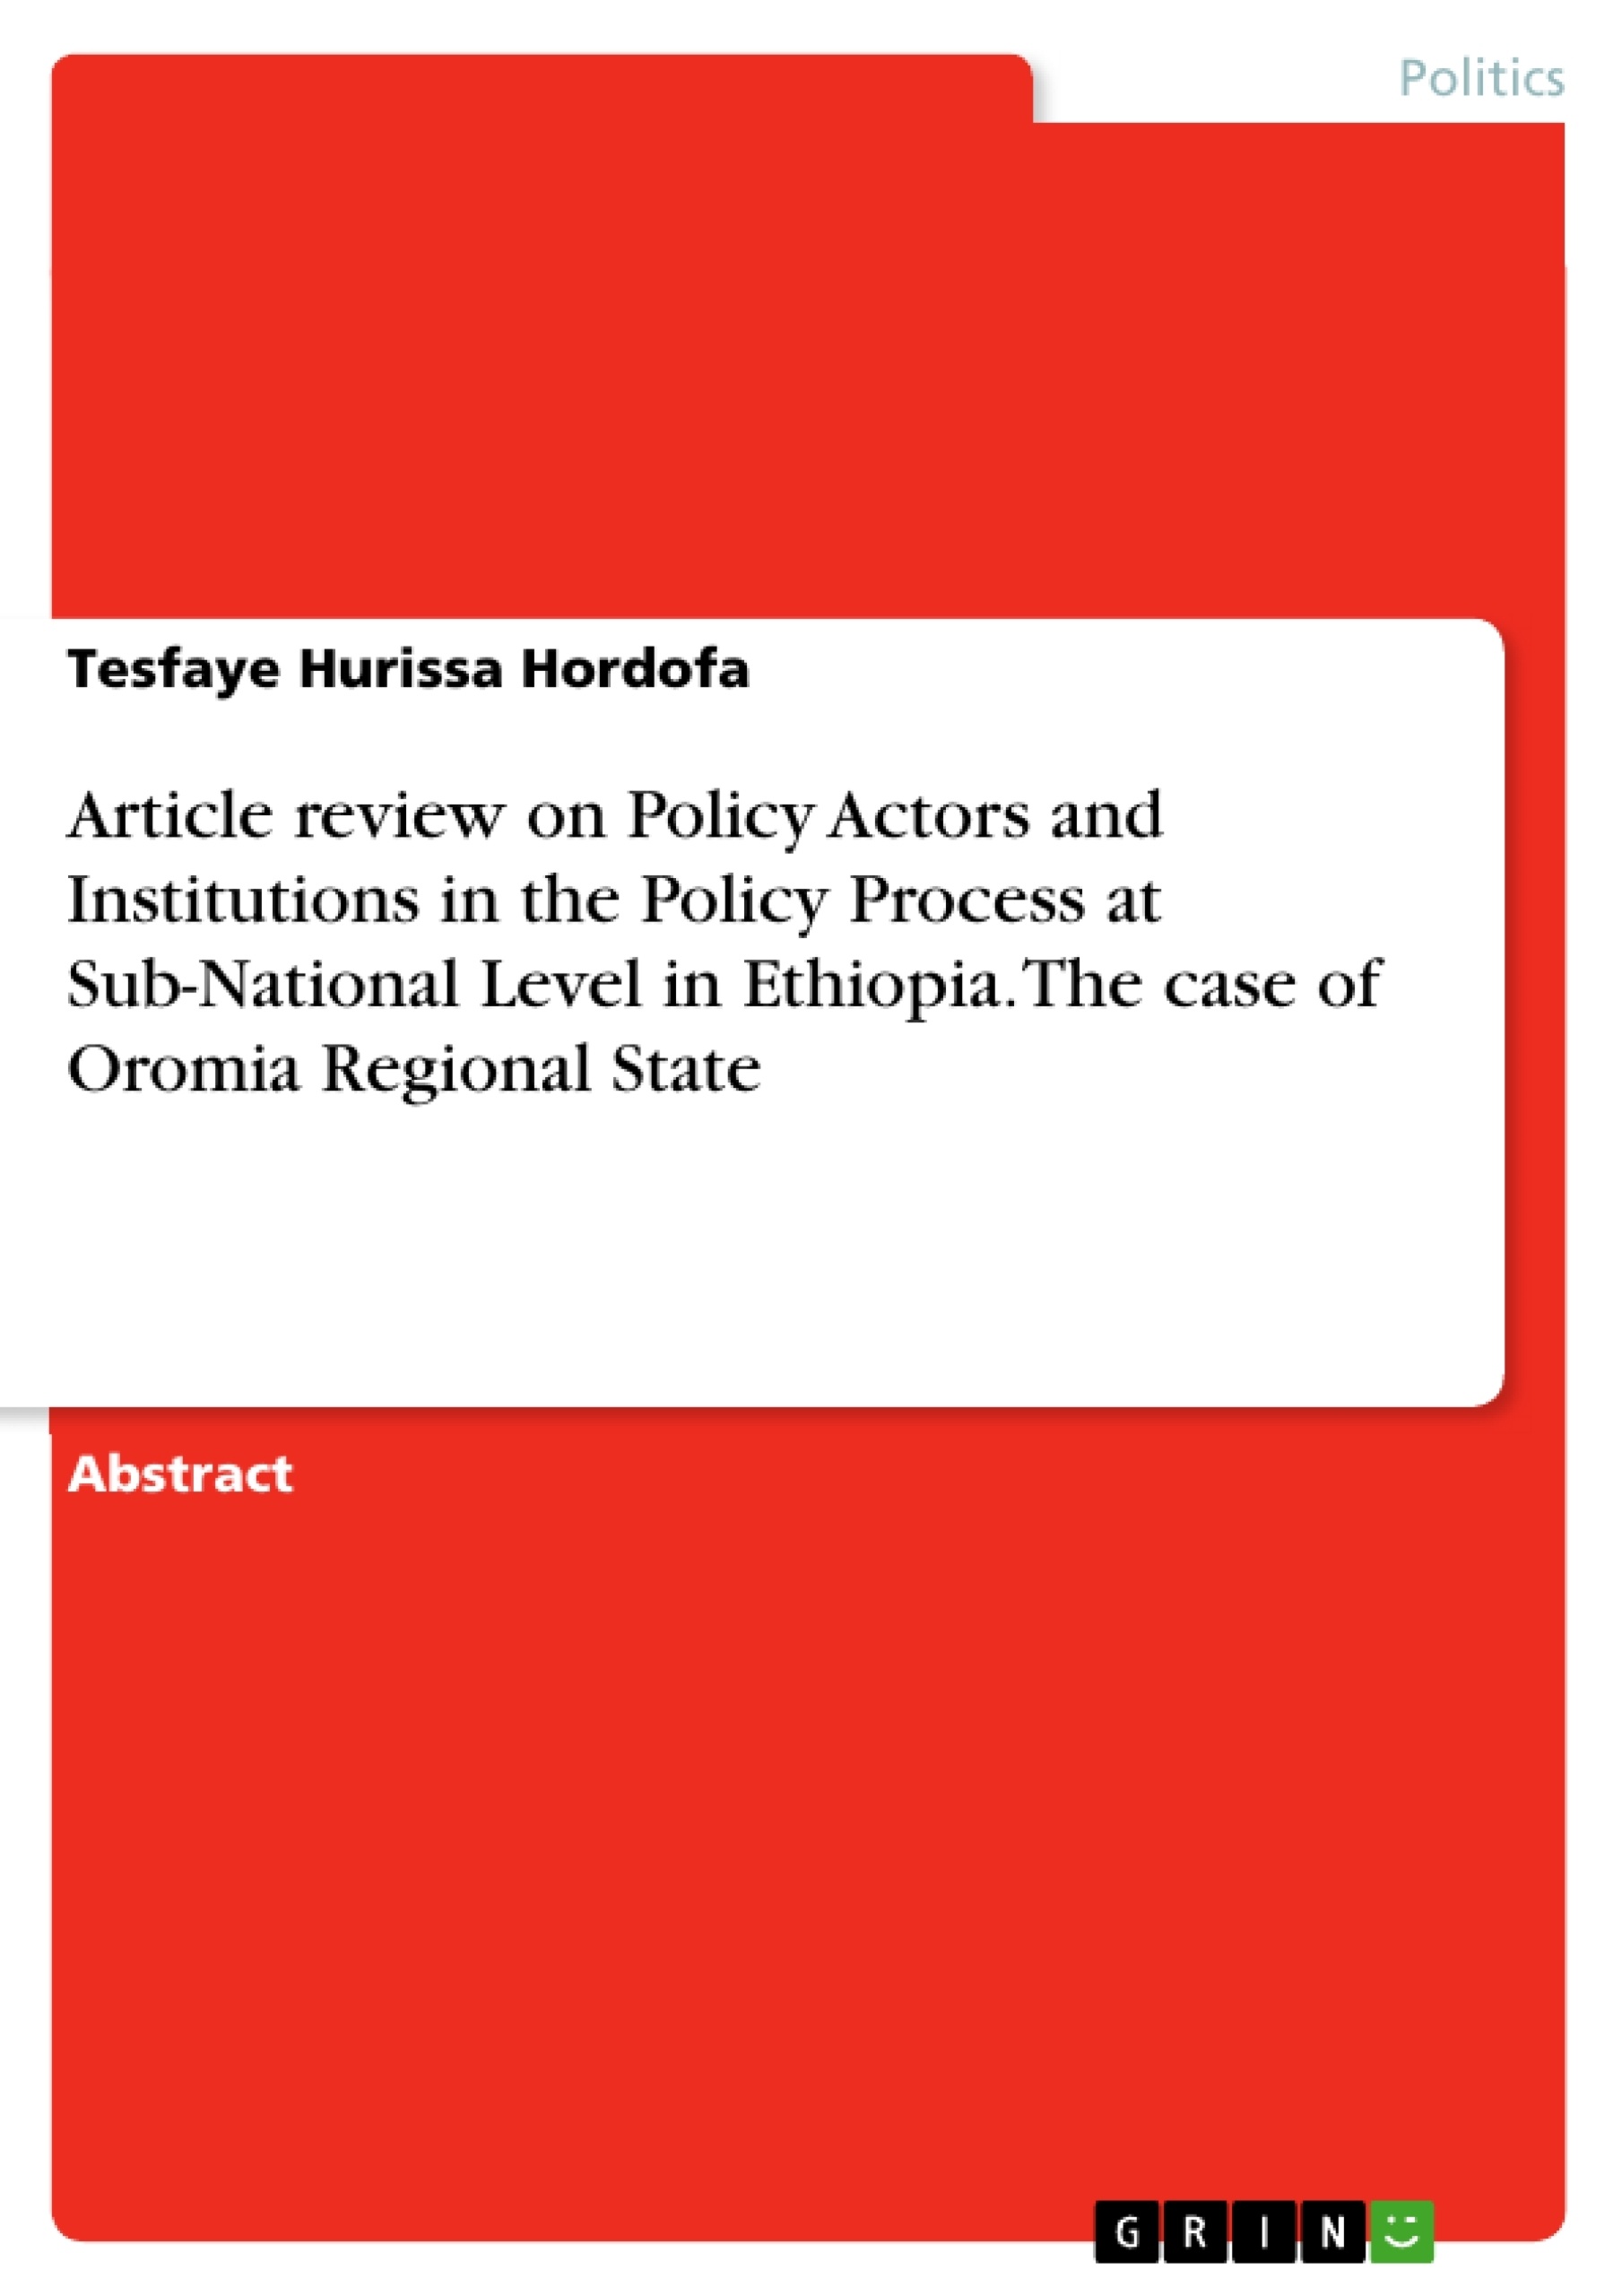 Título: Article review on Policy Actors and Institutions in the Policy Process at Sub-National Level in Ethiopia. The case of Oromia Regional State